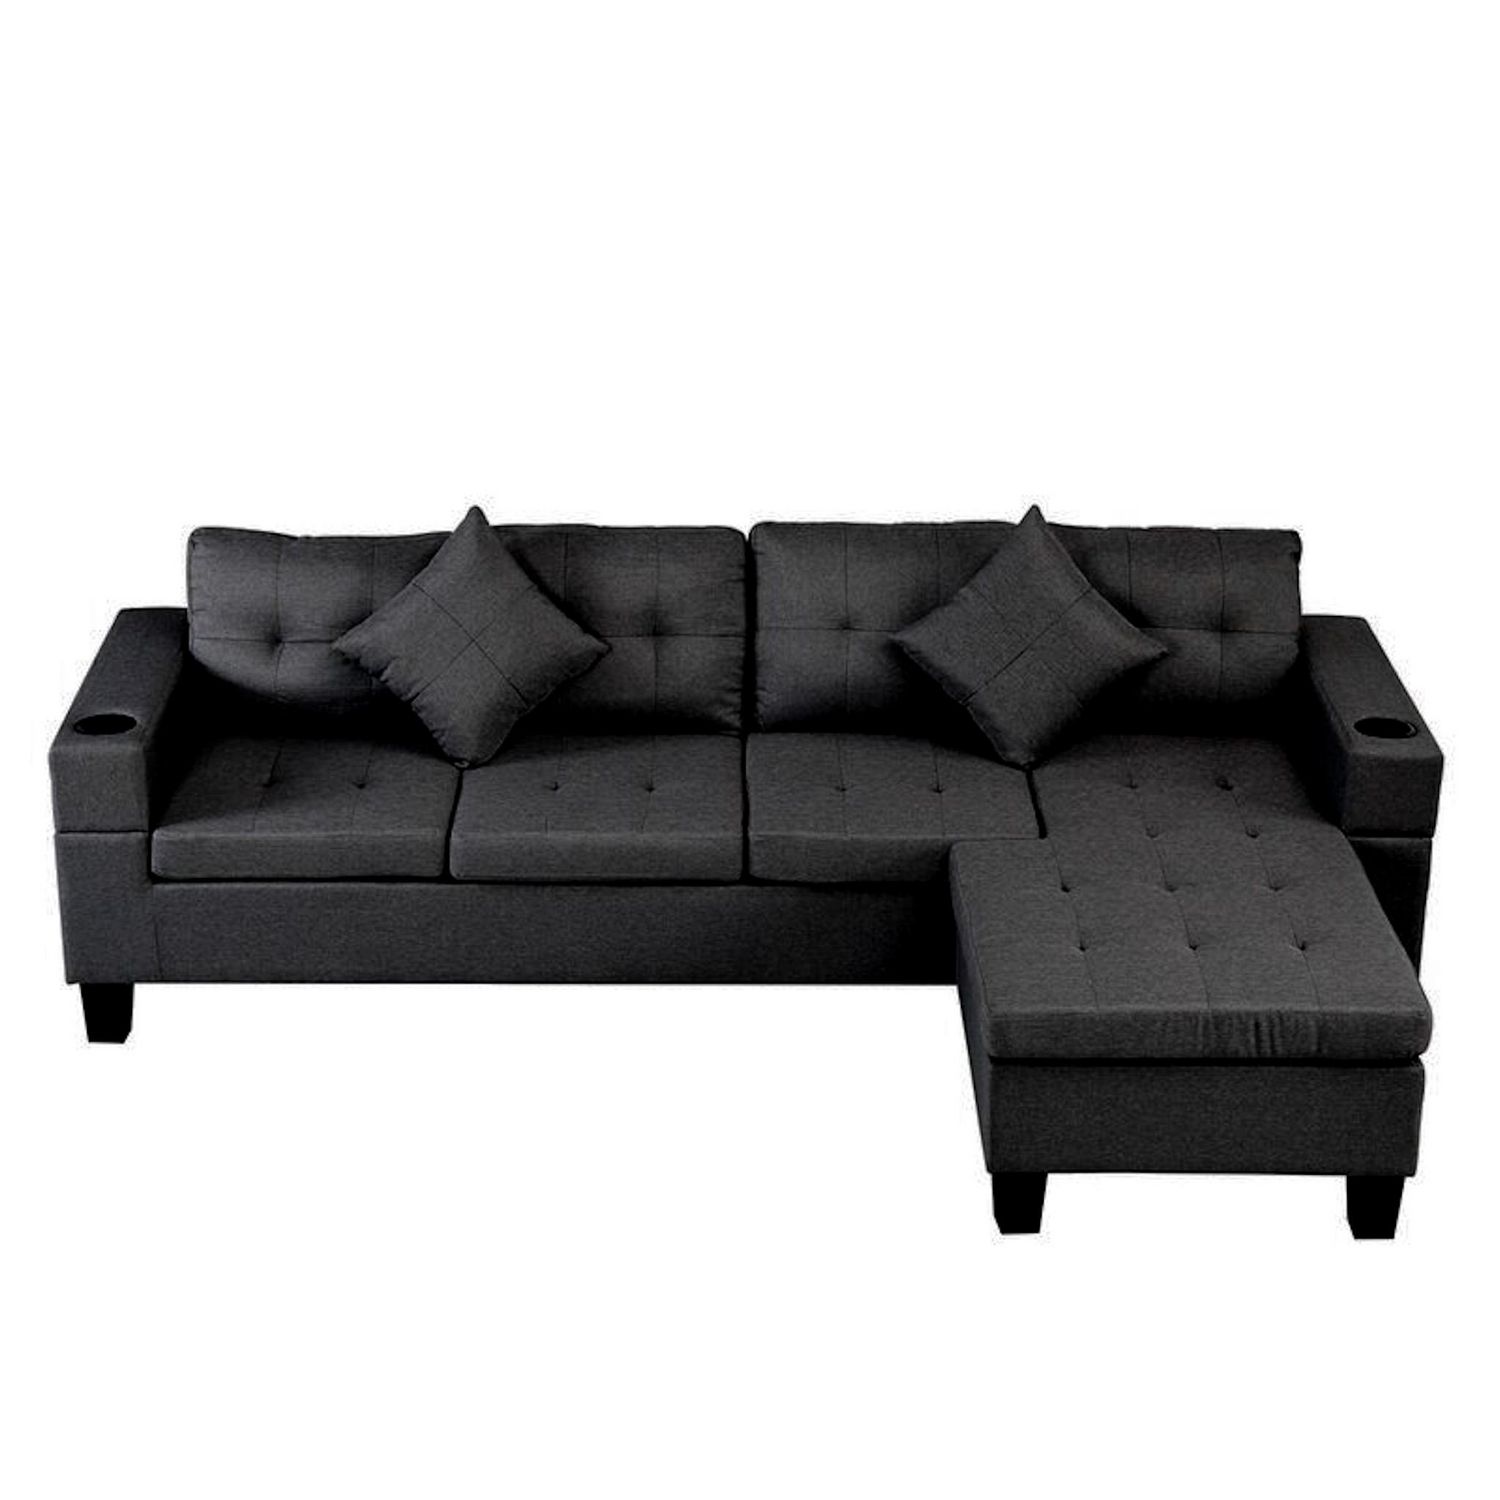 Aerys Sectional Sofa Couch, Reversible Upholstered L-Shaped Sofa